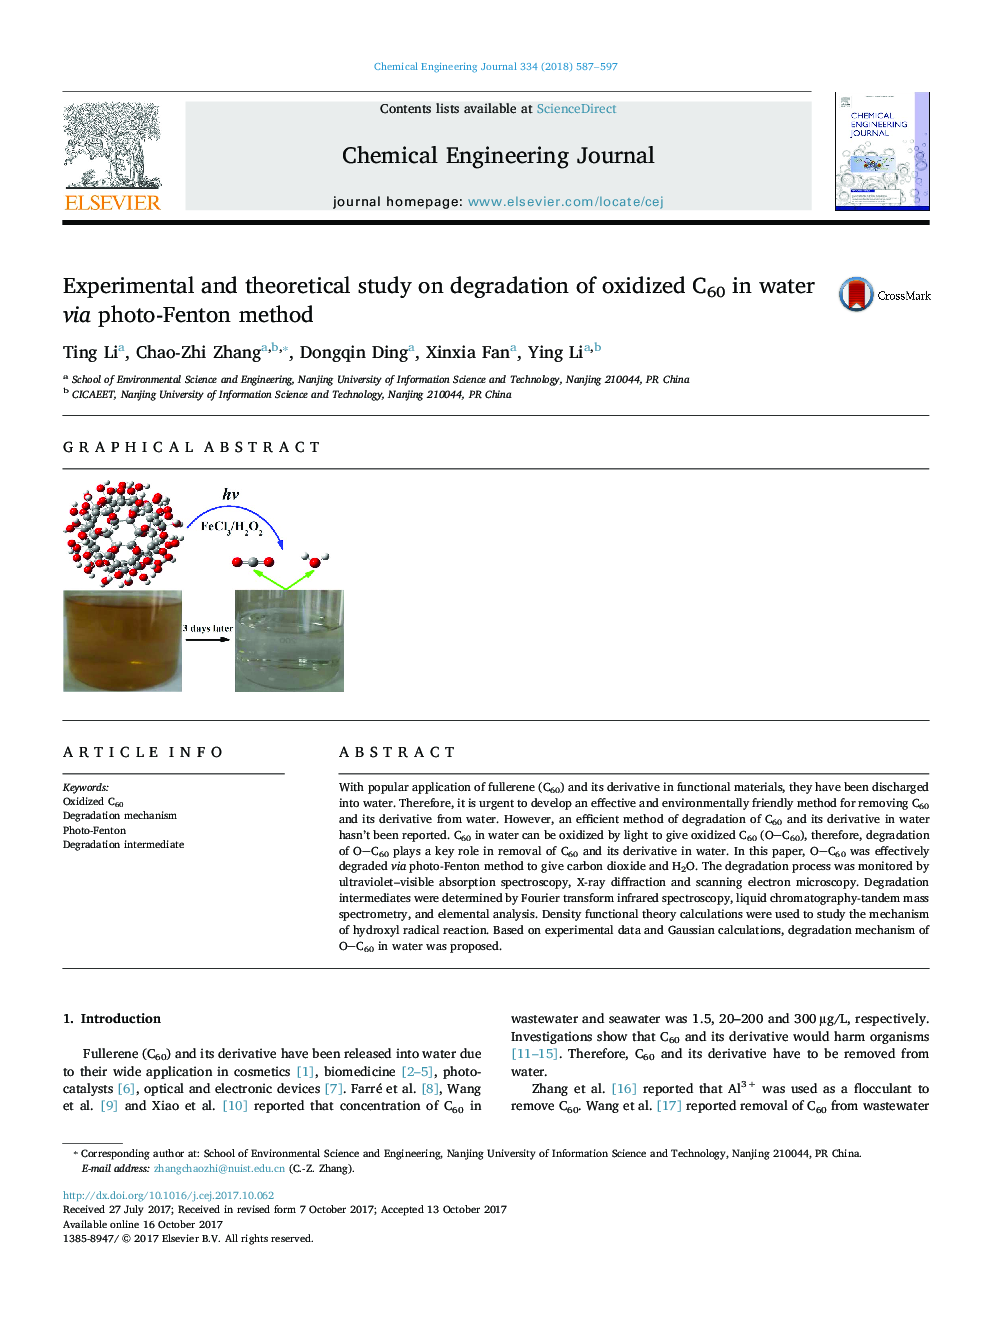 Experimental and theoretical study on degradation of oxidized C60 in water via photo-Fenton method